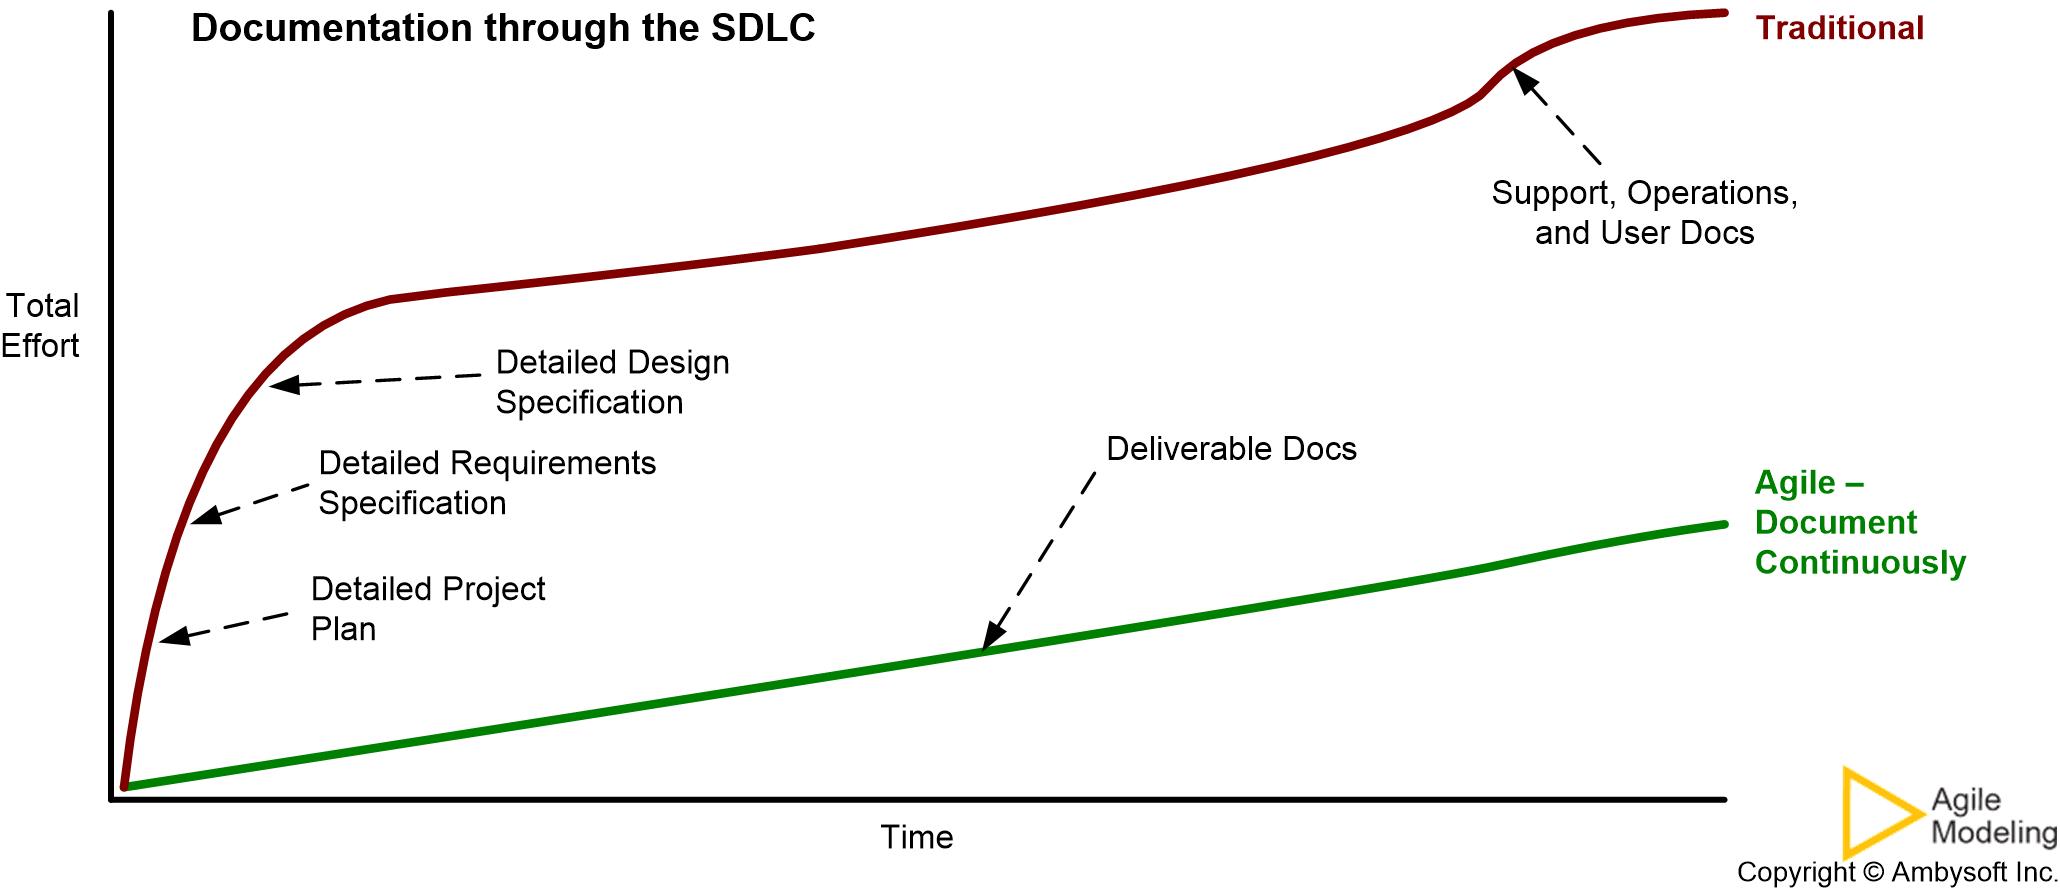 Agile Documentation - Document Continuously strategy